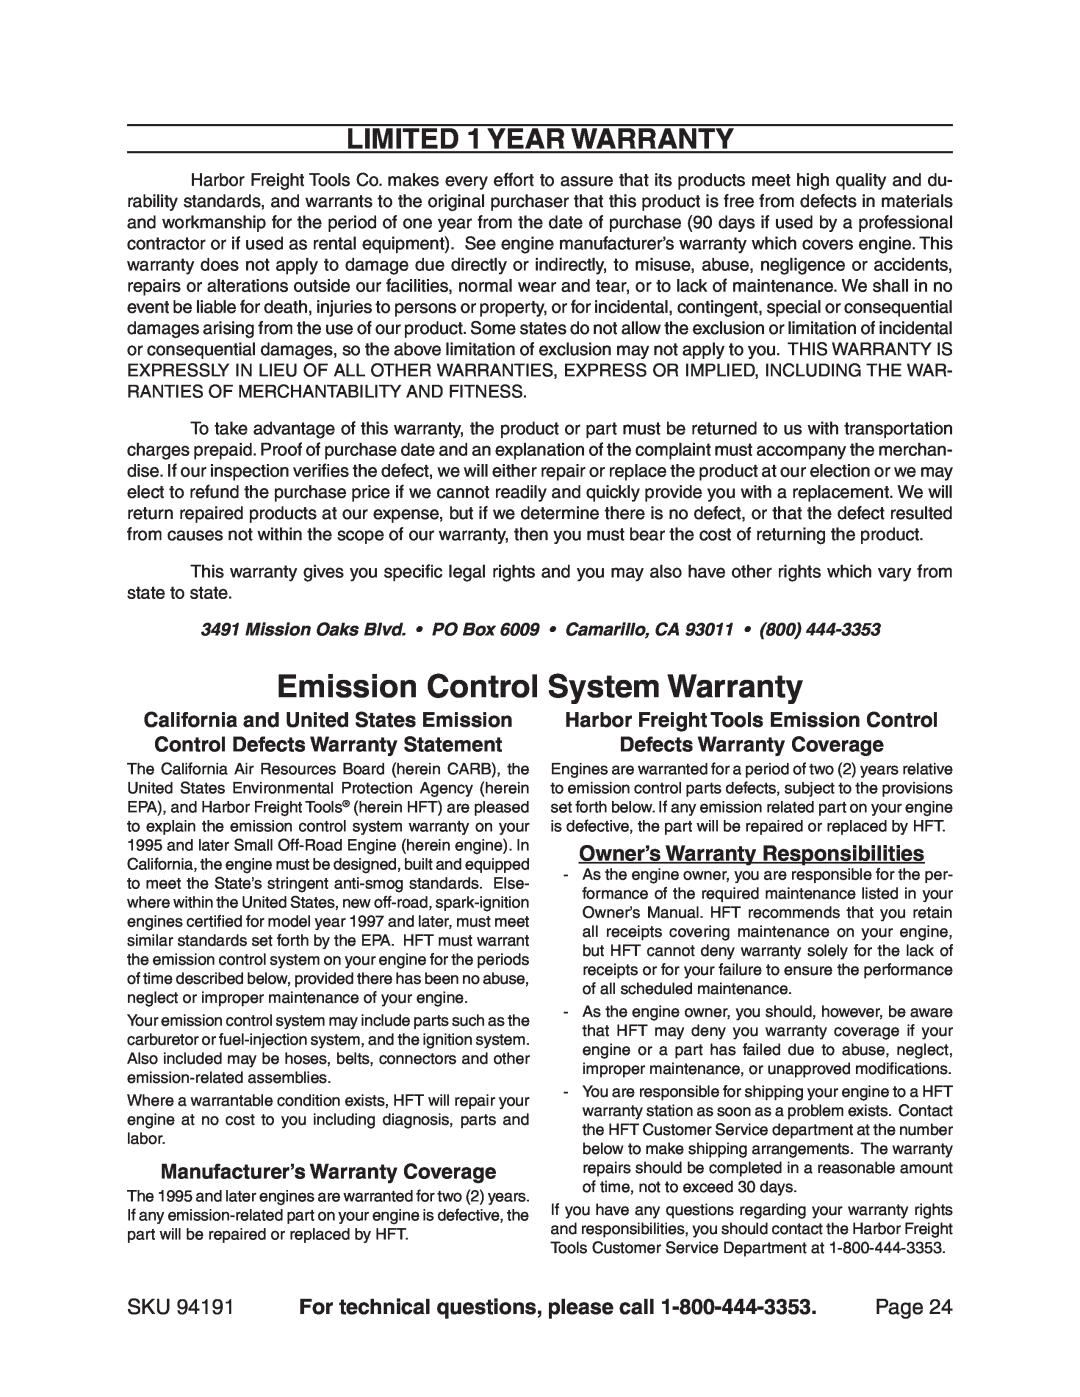 Harbor Freight Tools 94191 Emission Control System Warranty, Limited 1 year warranty, Owner’s Warranty Responsibilities 